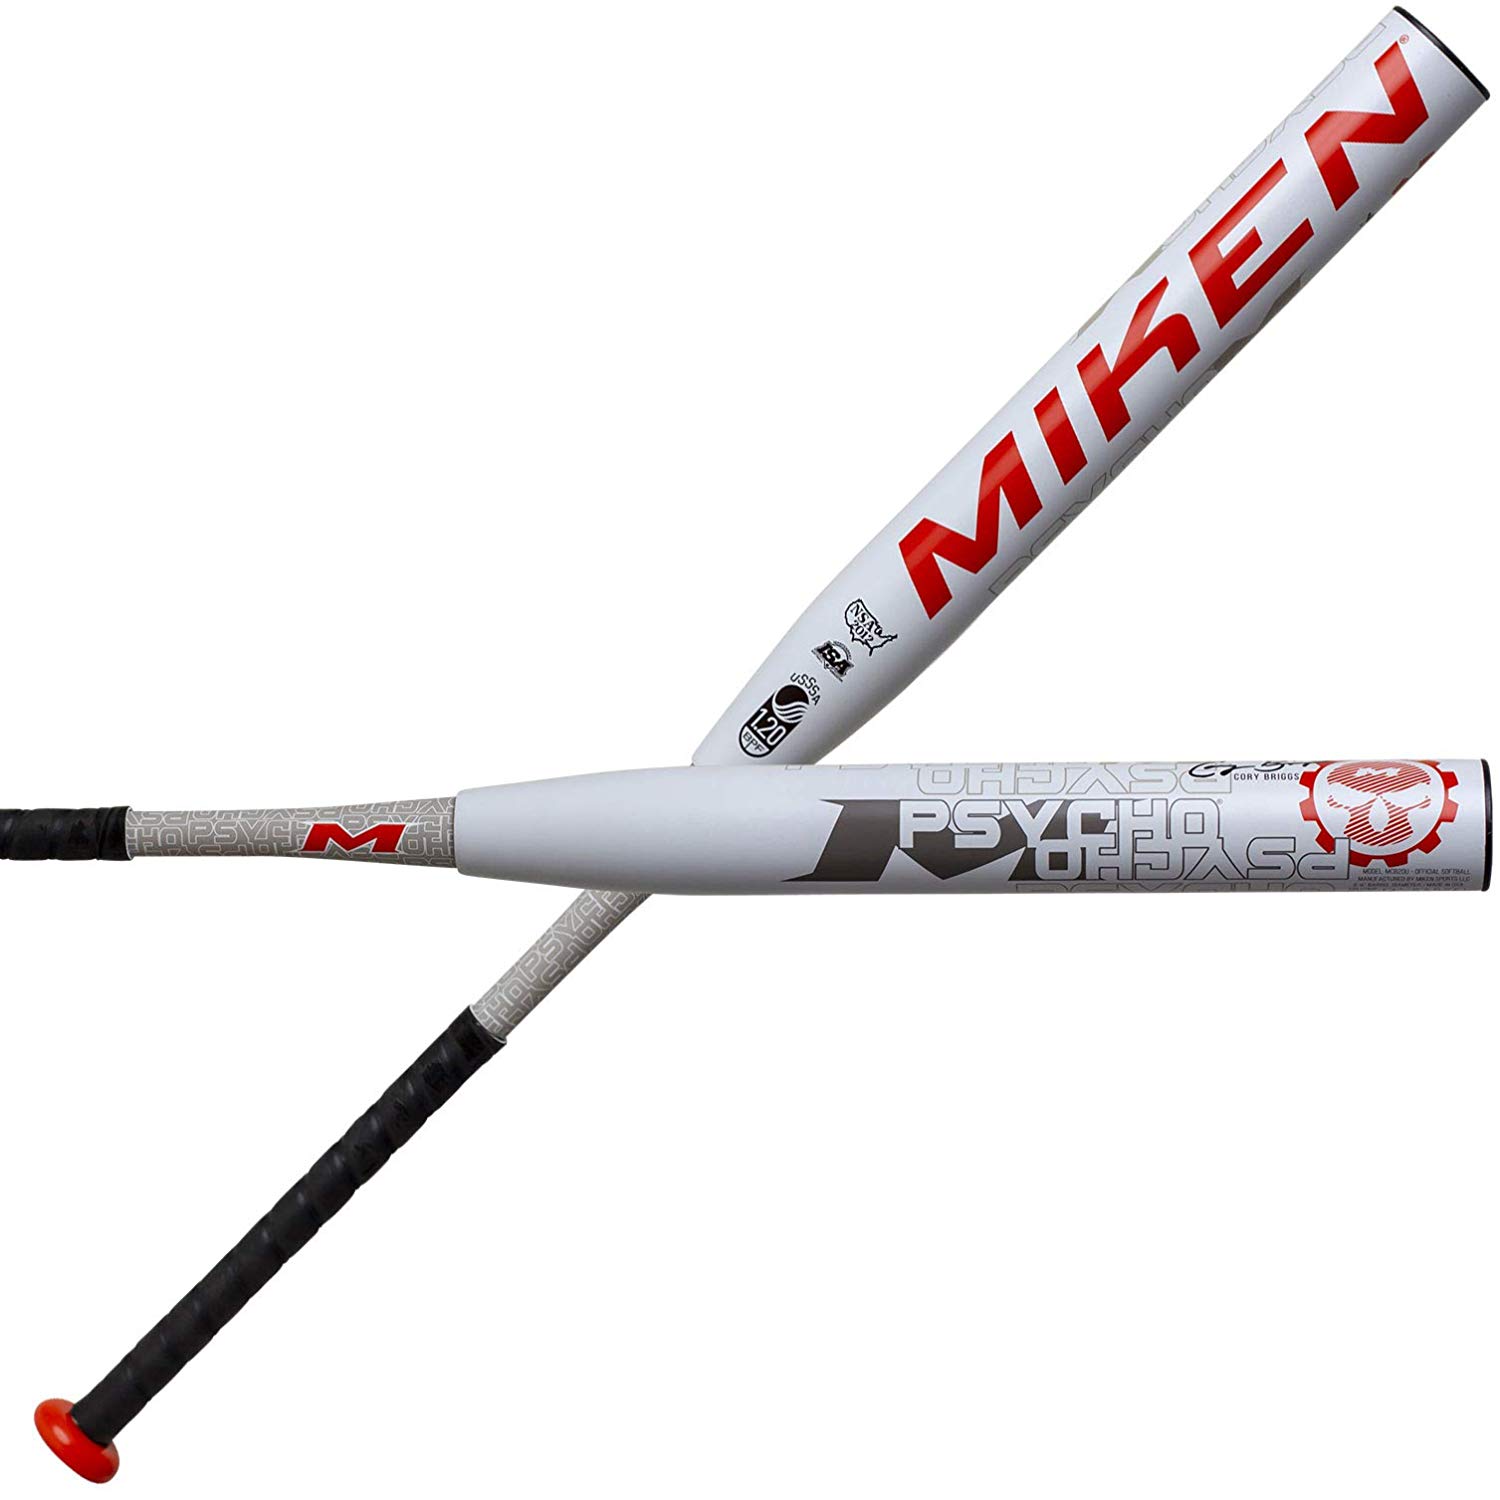 Miken's breakthrough tetra-core tech optimizes performance by utilizing an inner core tube and an outer core layering to maximize the sweetspot and durability Miken's F2P (FLEX 2 Power) optimizes handle flex and increases the overall speed of the bat head through the hitting zone. Miken bats are 100% composite Made in USA. Made in the U.S.A.  Size:   2 1/4 in  Frame:   Two-Piece  Player:   Cory Briggs  Technology:   Triple Matrix Core, 100 COMP  Series:   Signature Series  Warranty:   1 Year  Barrel Length:   14 in 